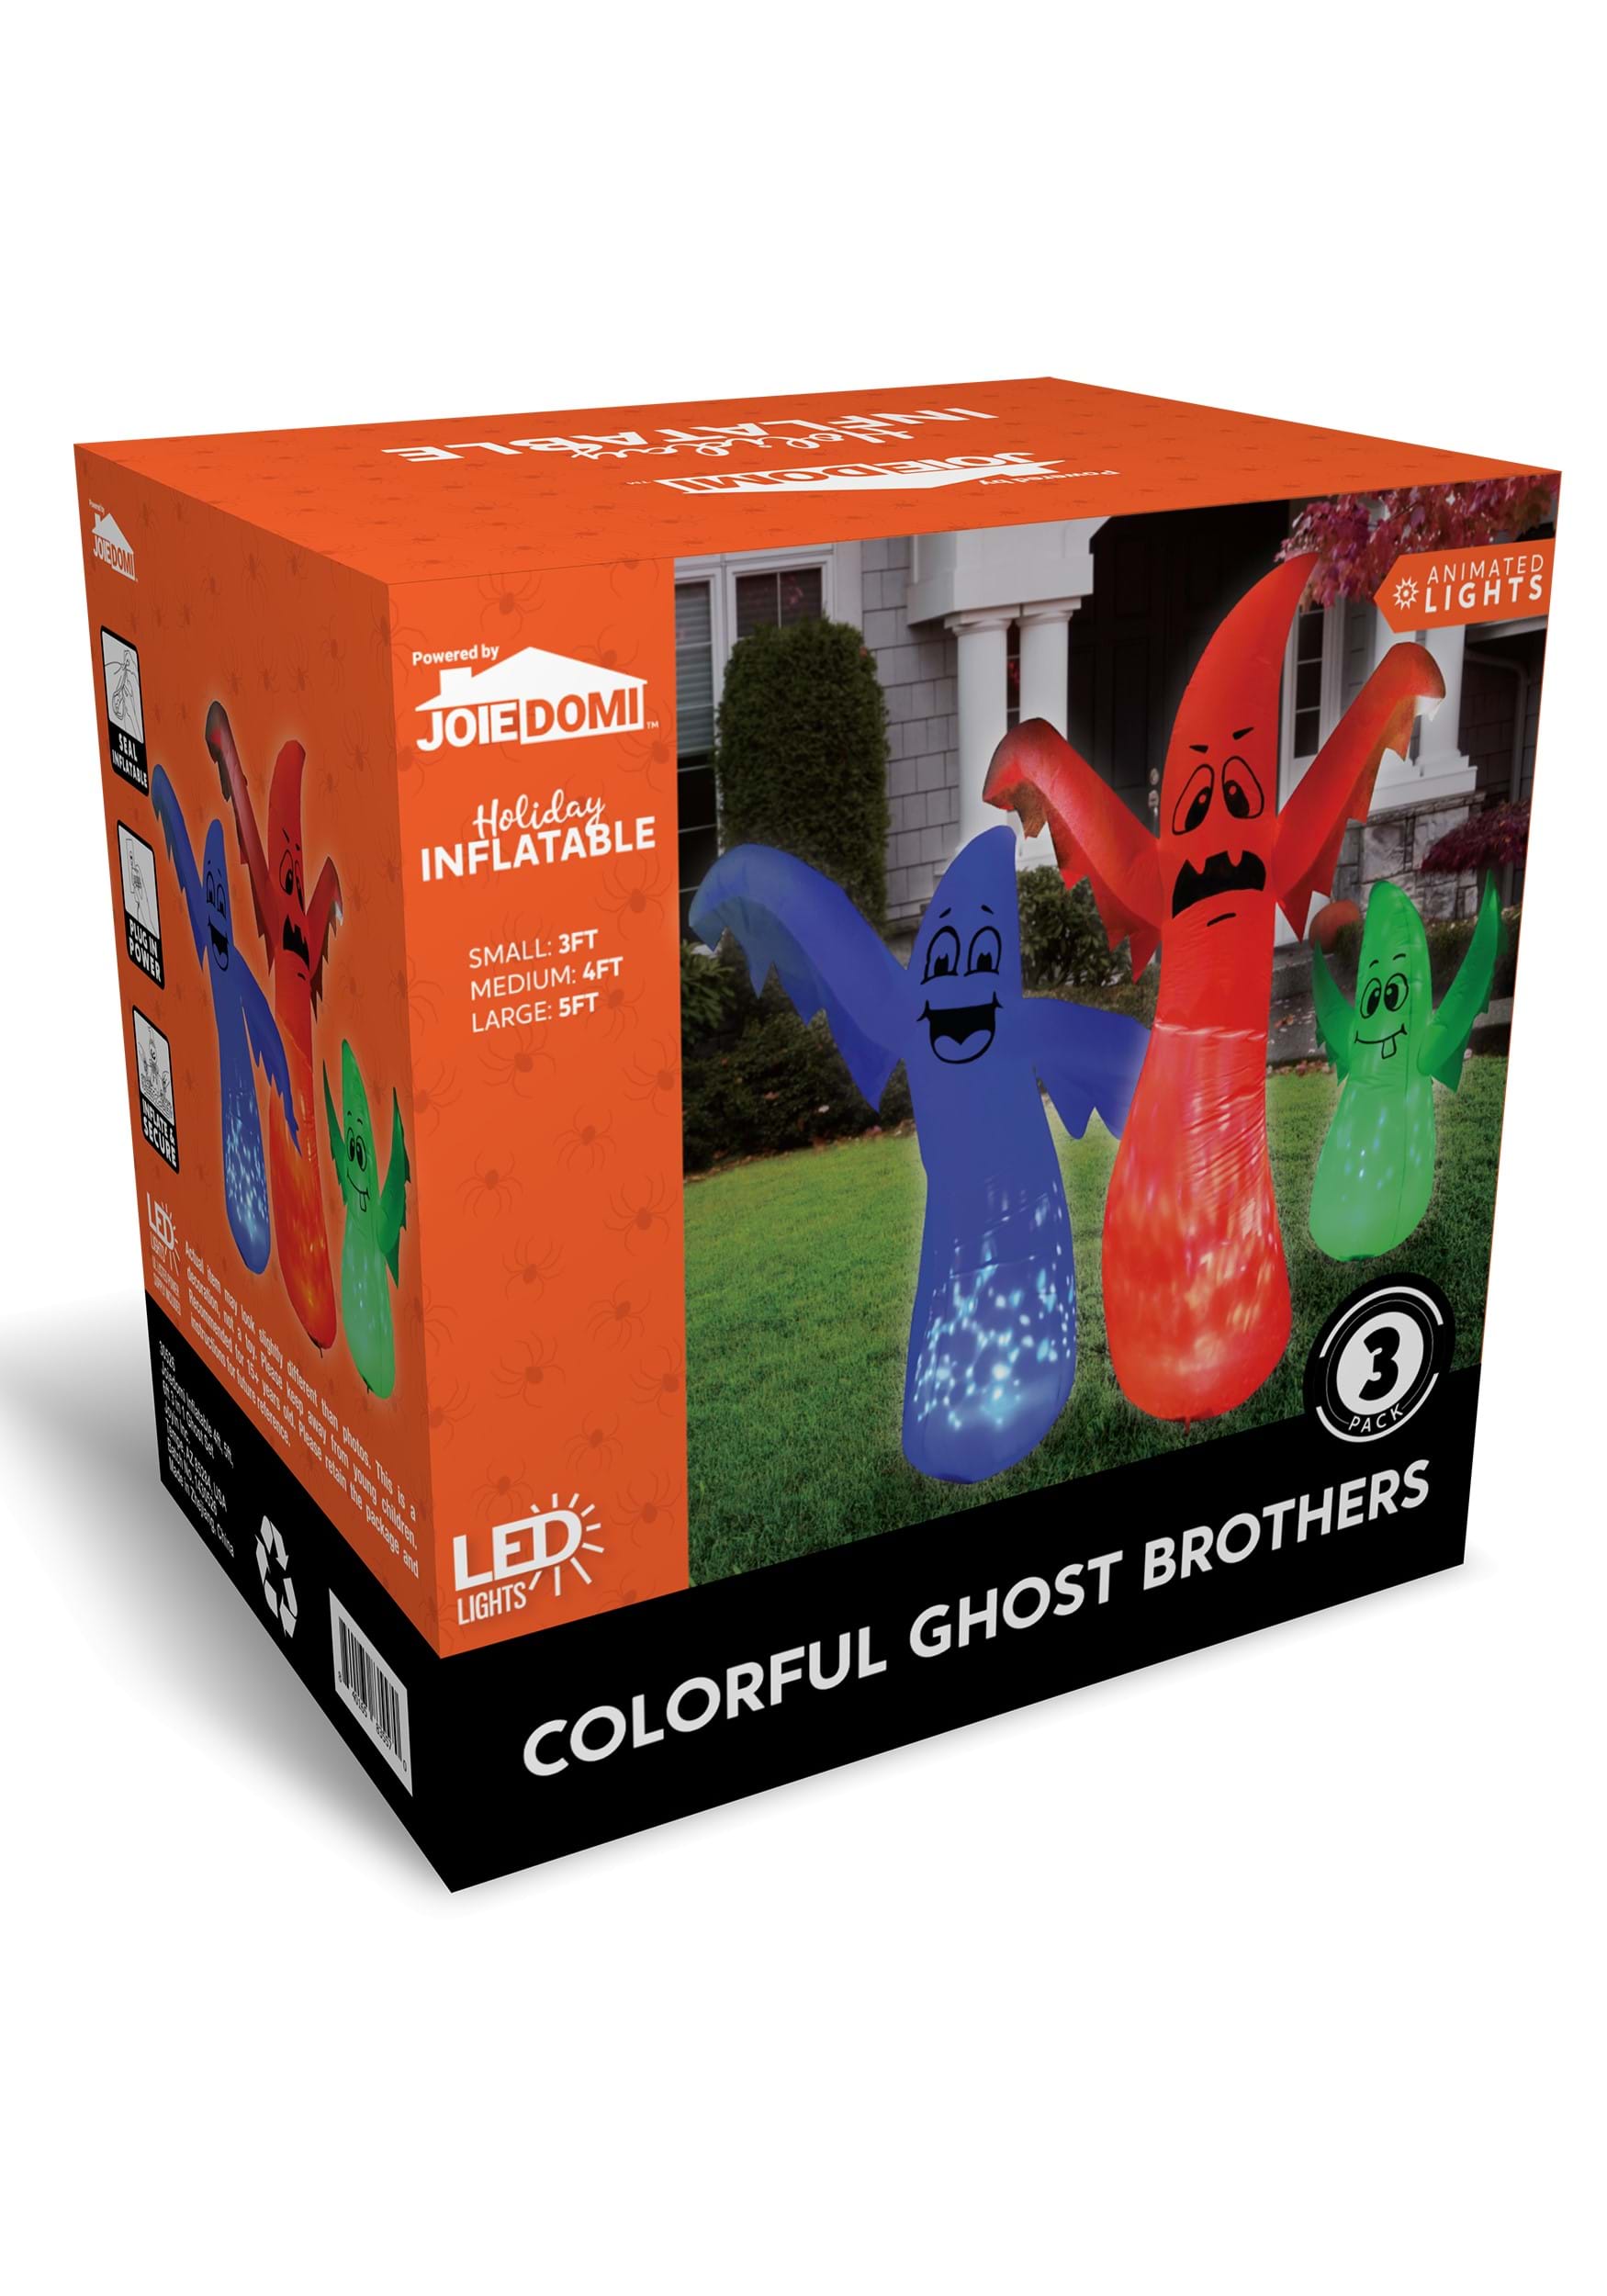 Small, Medium, & Large 3 Pack Of Dancing Ghosts Inflatable Decoration